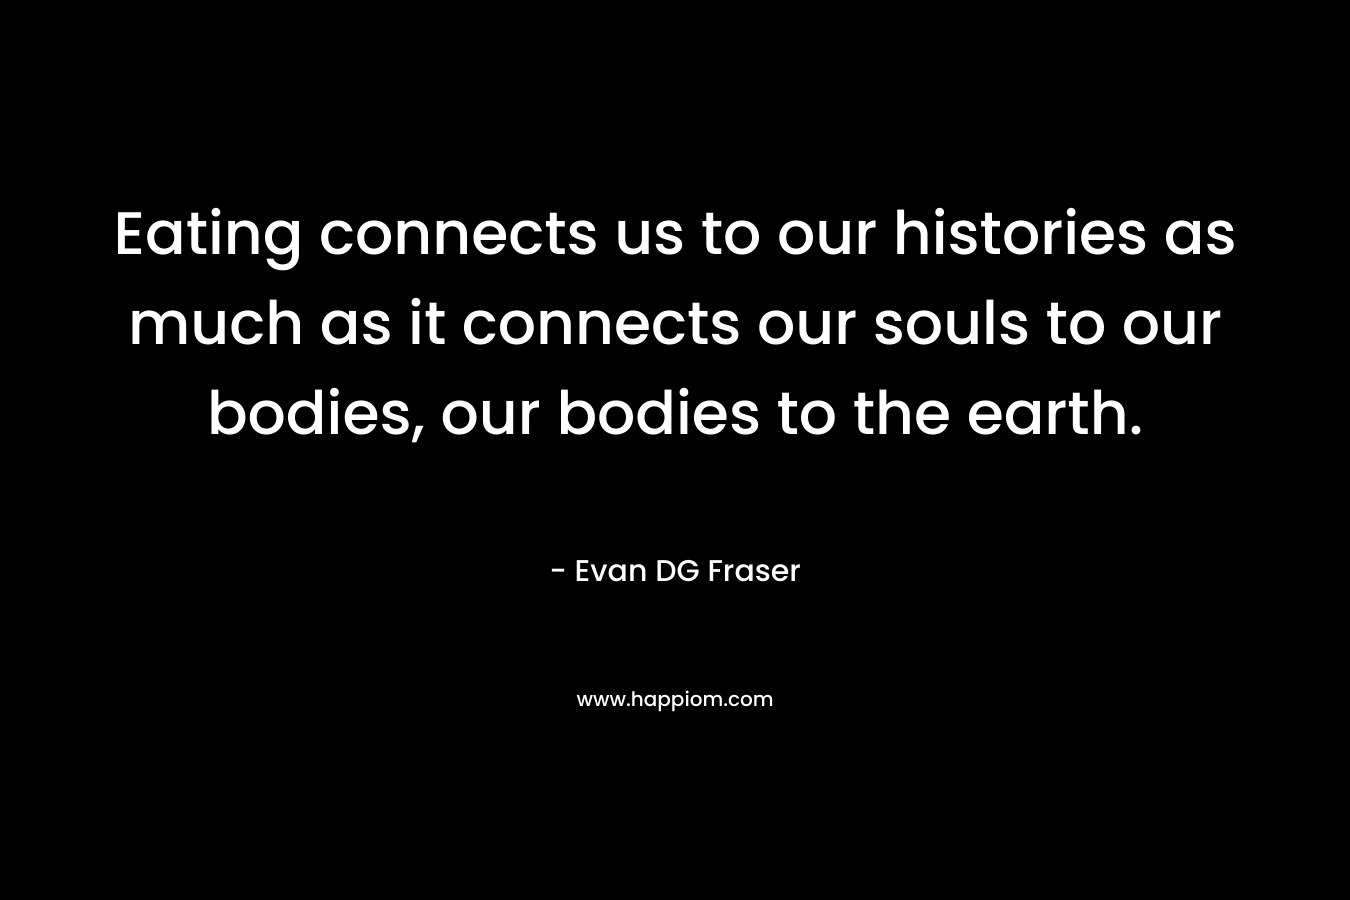 Eating connects us to our histories as much as it connects our souls to our bodies, our bodies to the earth. – Evan DG Fraser